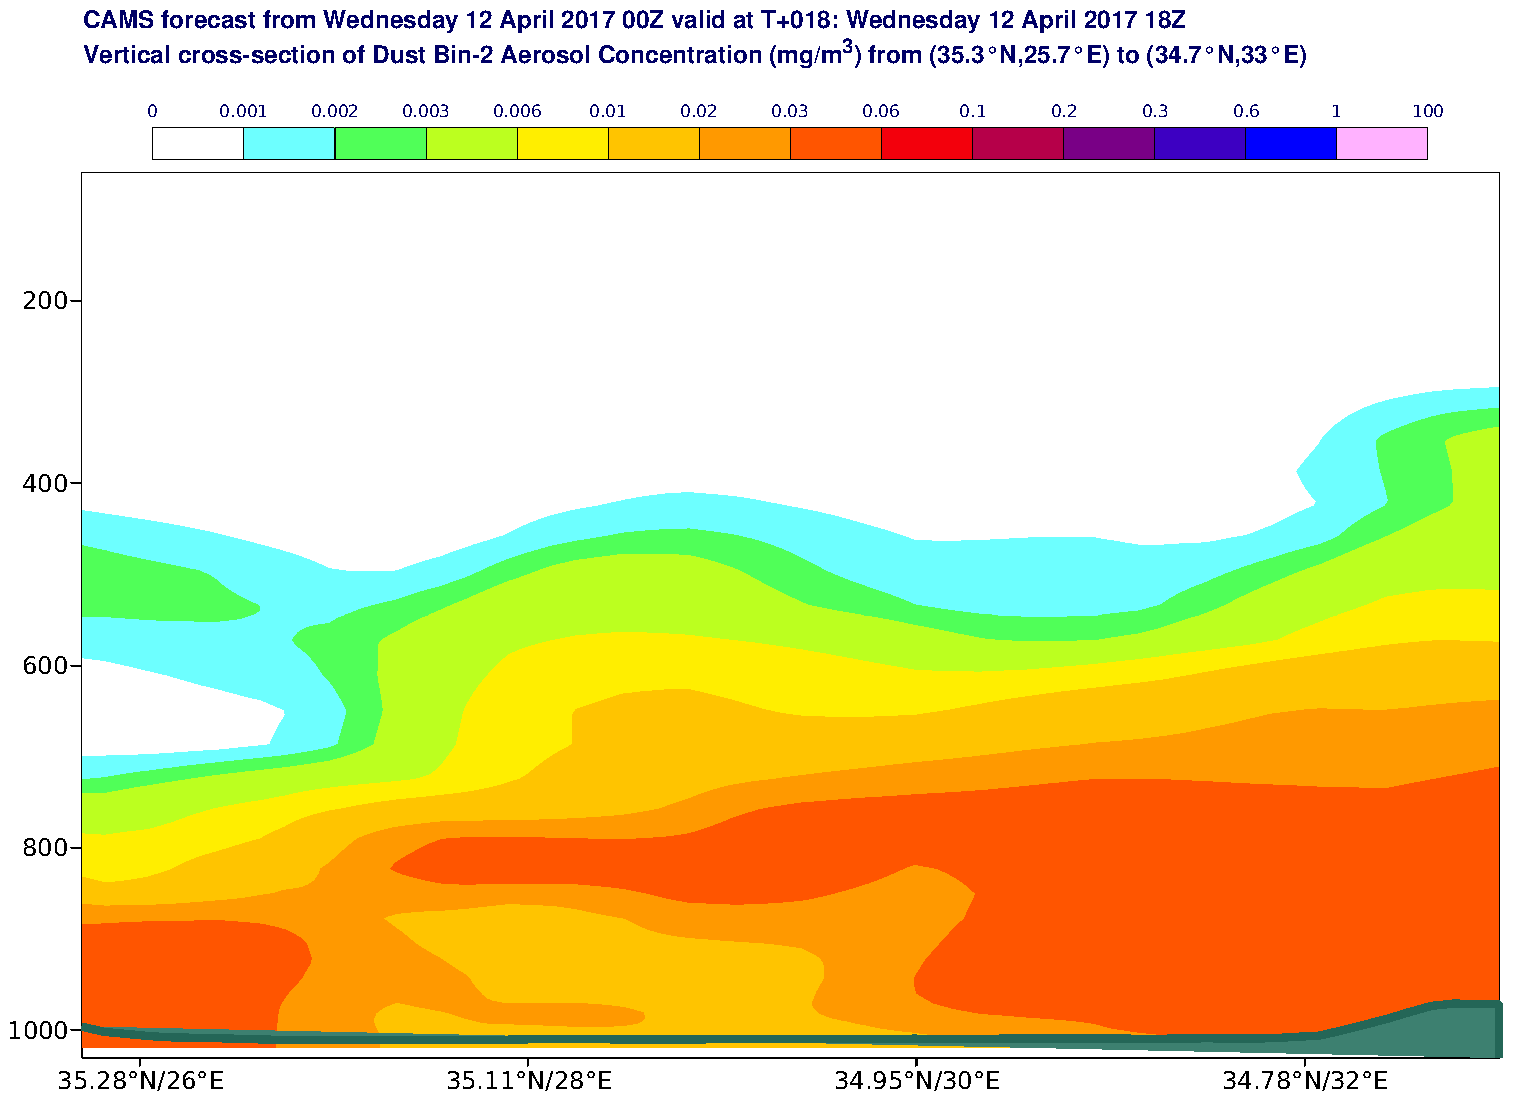 Vertical cross-section of Dust Bin-2 Aerosol Concentration (mg/m3) valid at T18 - 2017-04-12 18:00